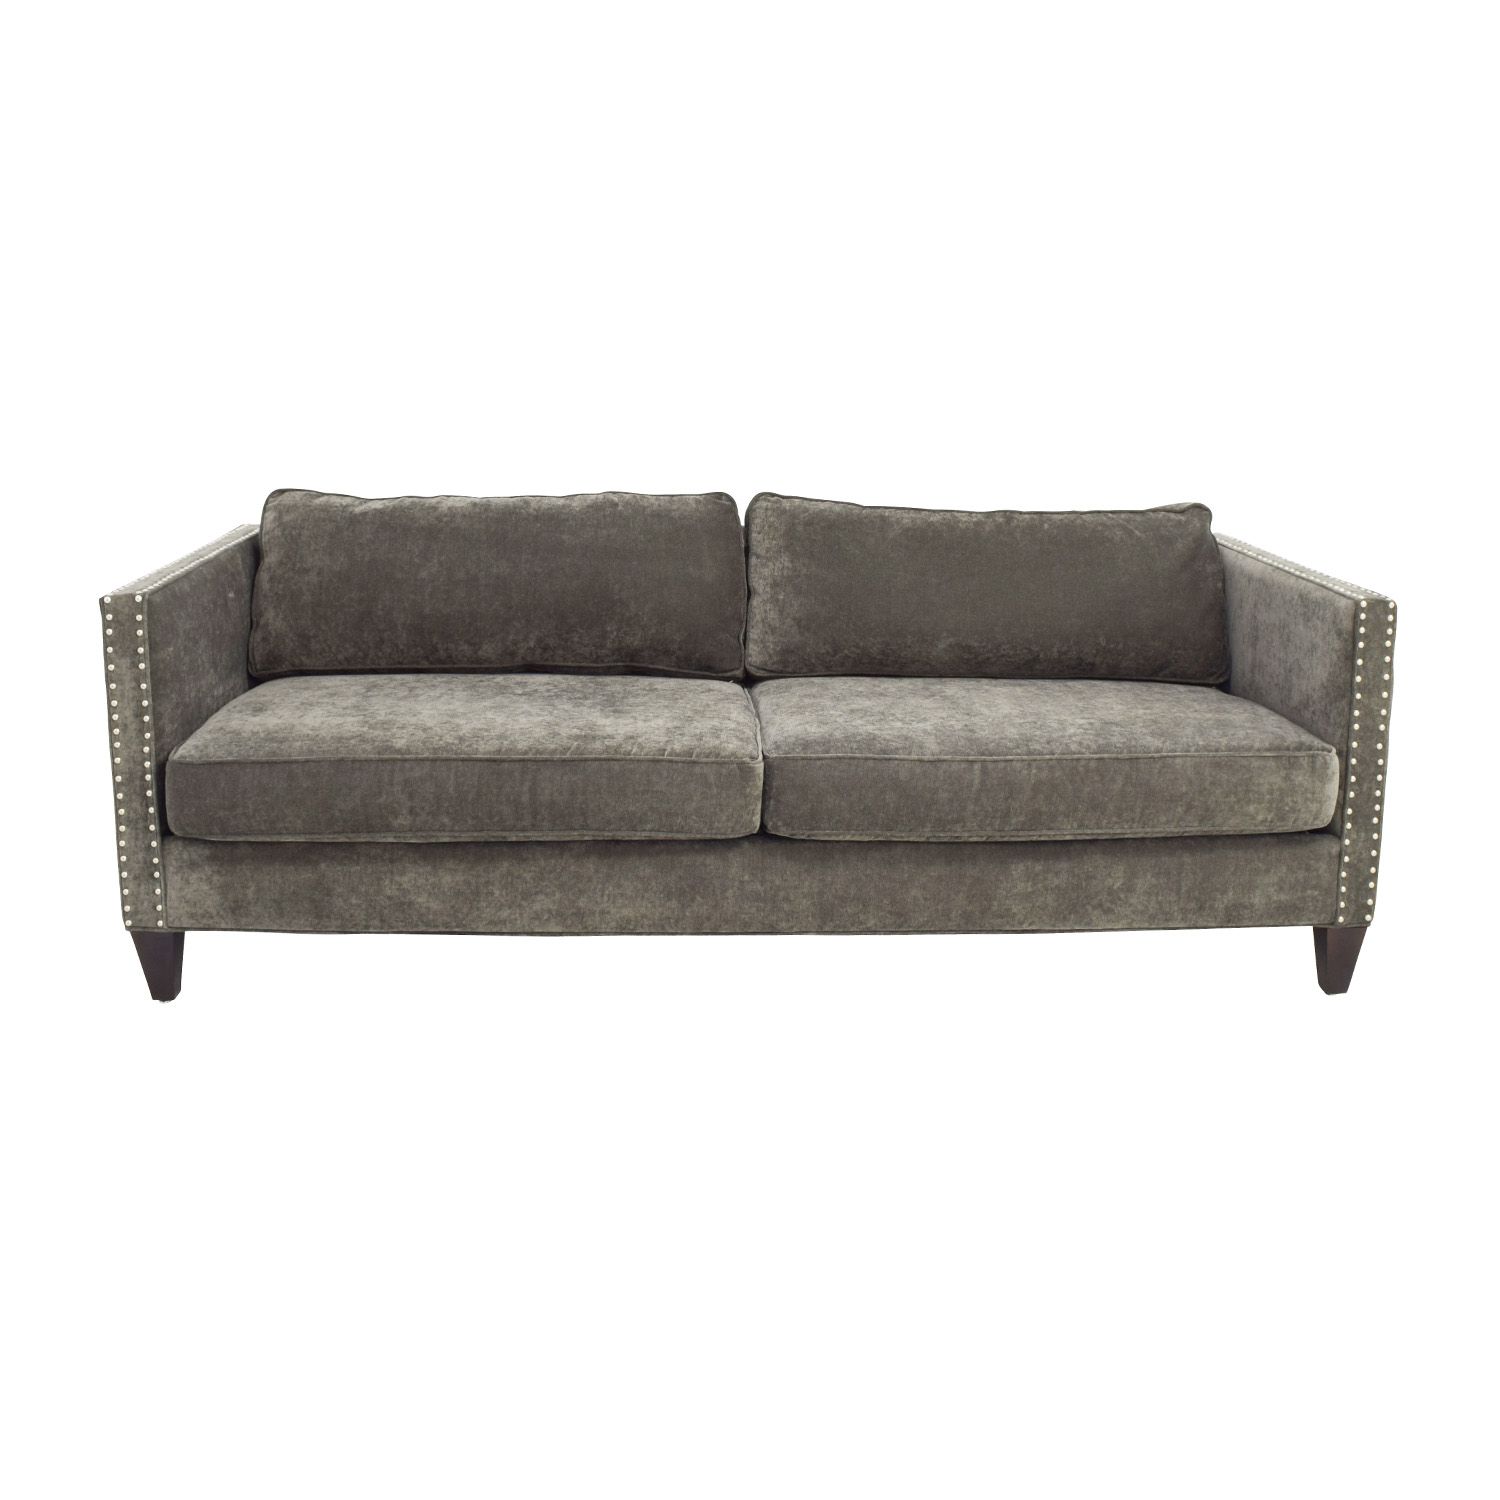 57% Off – Rowe Furniture Rowe Furniture Mitchell Grey Studded Sofa With Regard To Mitchell Arm Sofa Chairs (View 20 of 20)